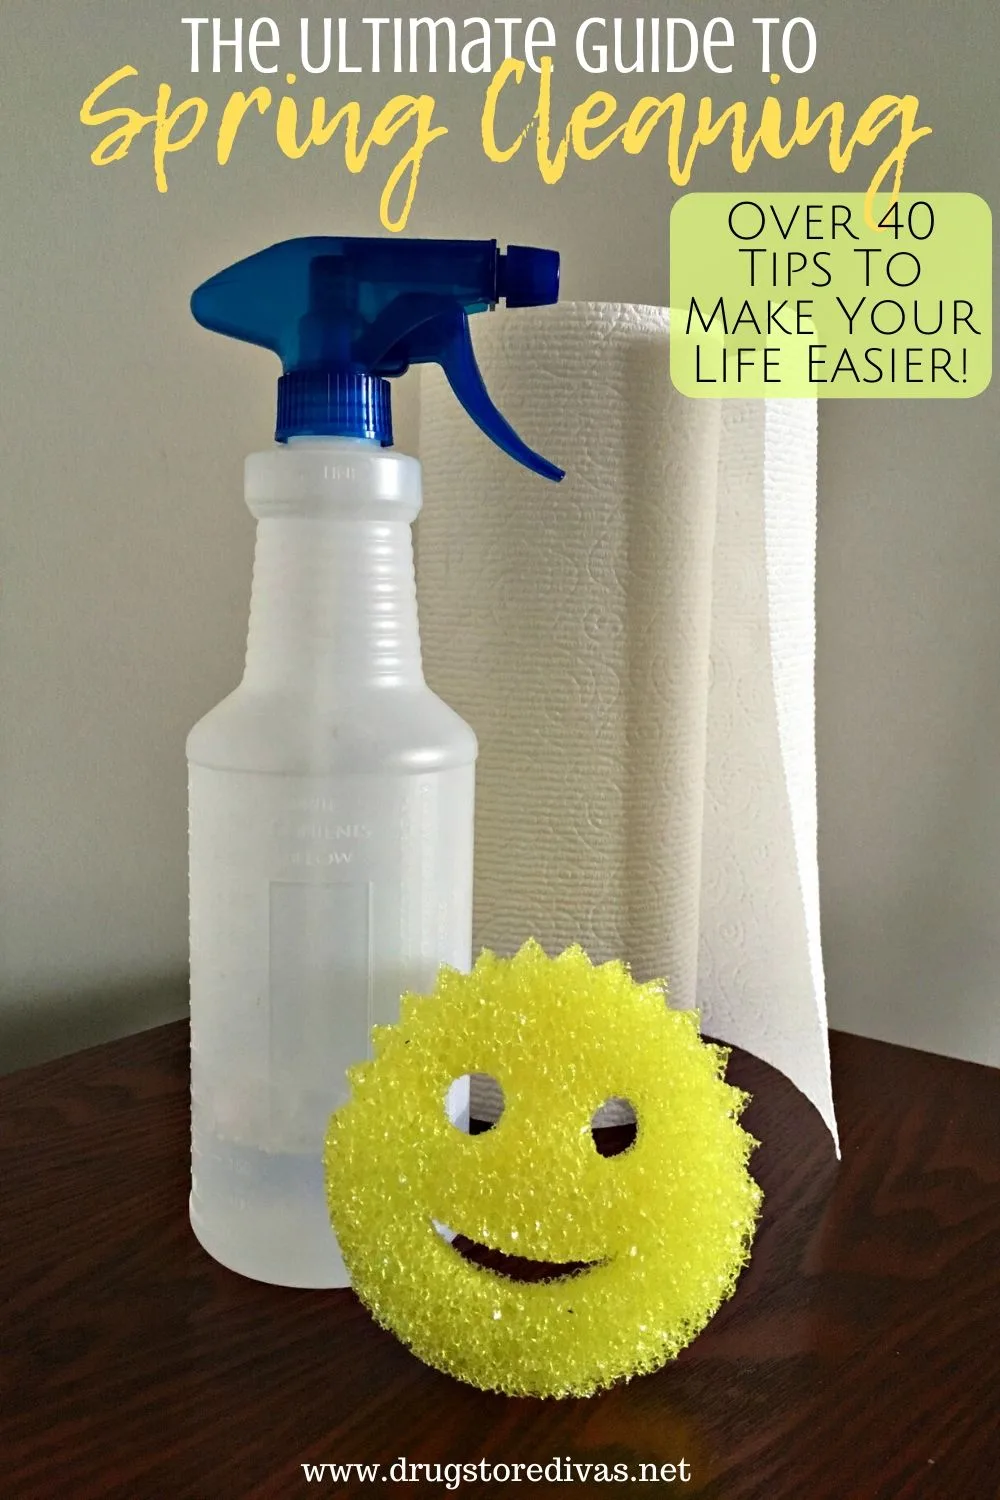 A spray bottle, paper towels, and a Scrub Daddy on a table with the words "The Ultimate Guide To Spring Cleaning" digitally written on top.